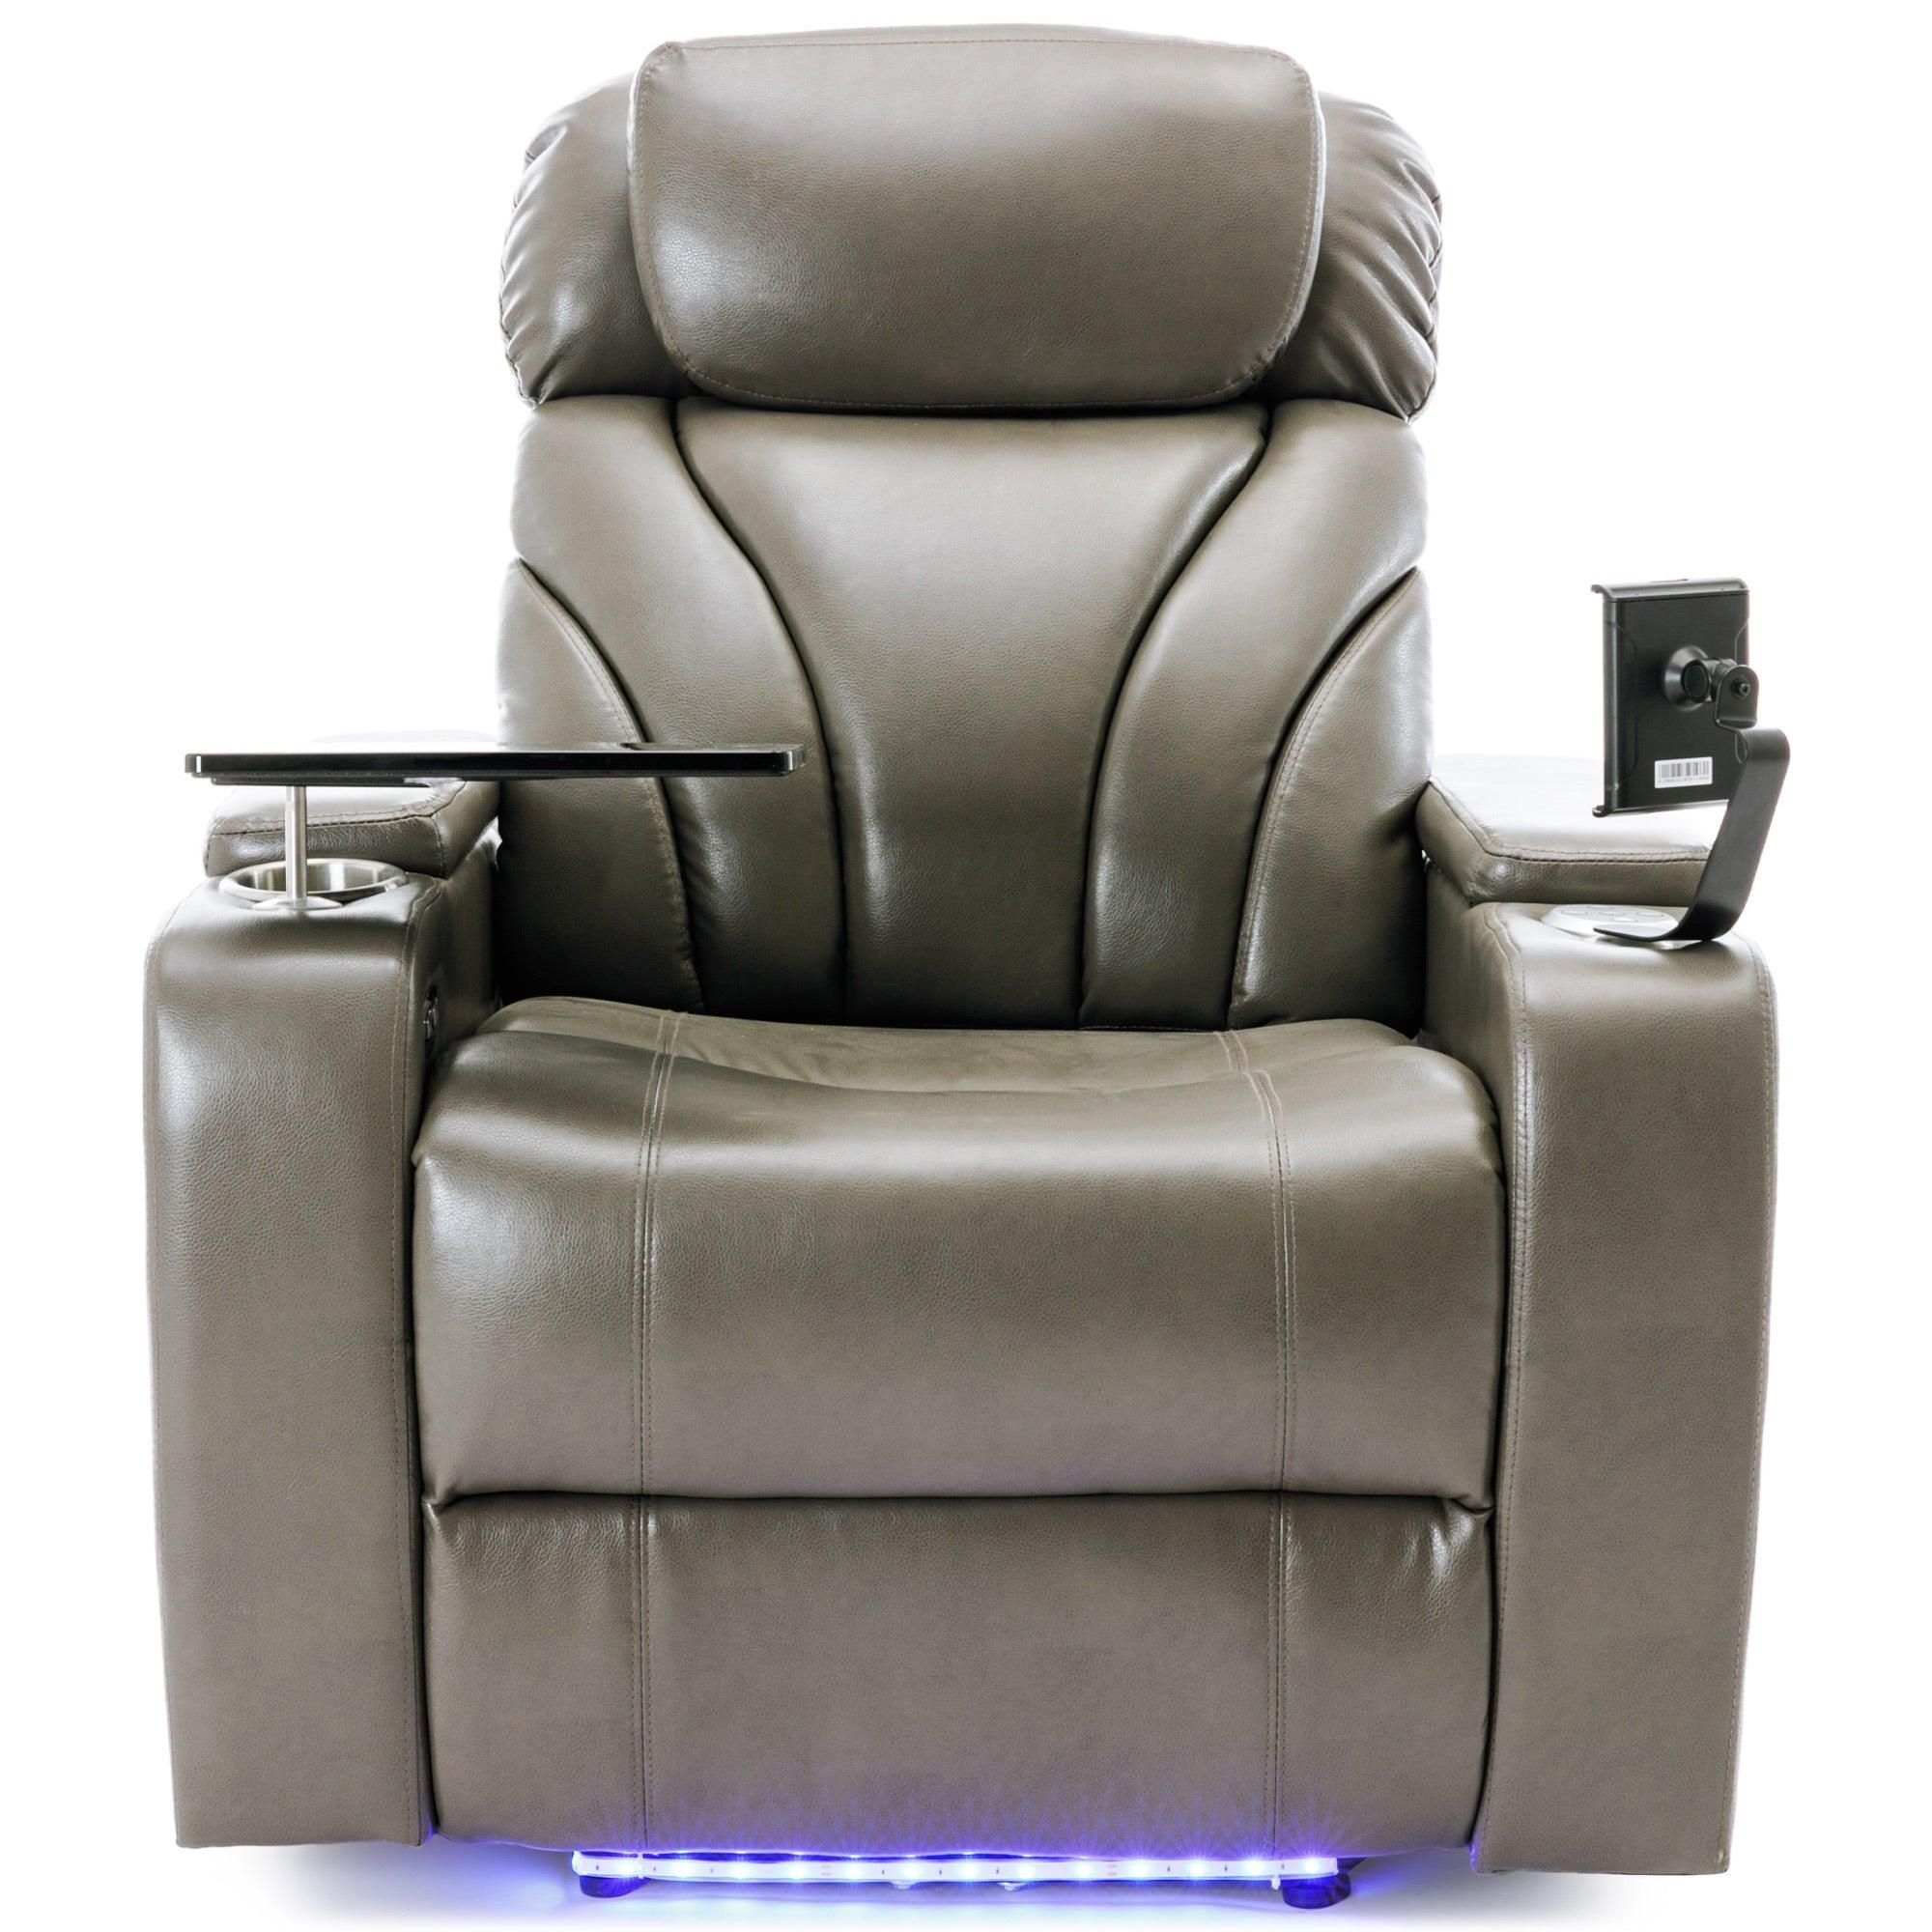 🆓🚛 Power Motion Recliner With Usb Charging Port & Hidden Arm Storage, Home Theater Seating With Convenient Cup Holder Design, & Stereo, Gray